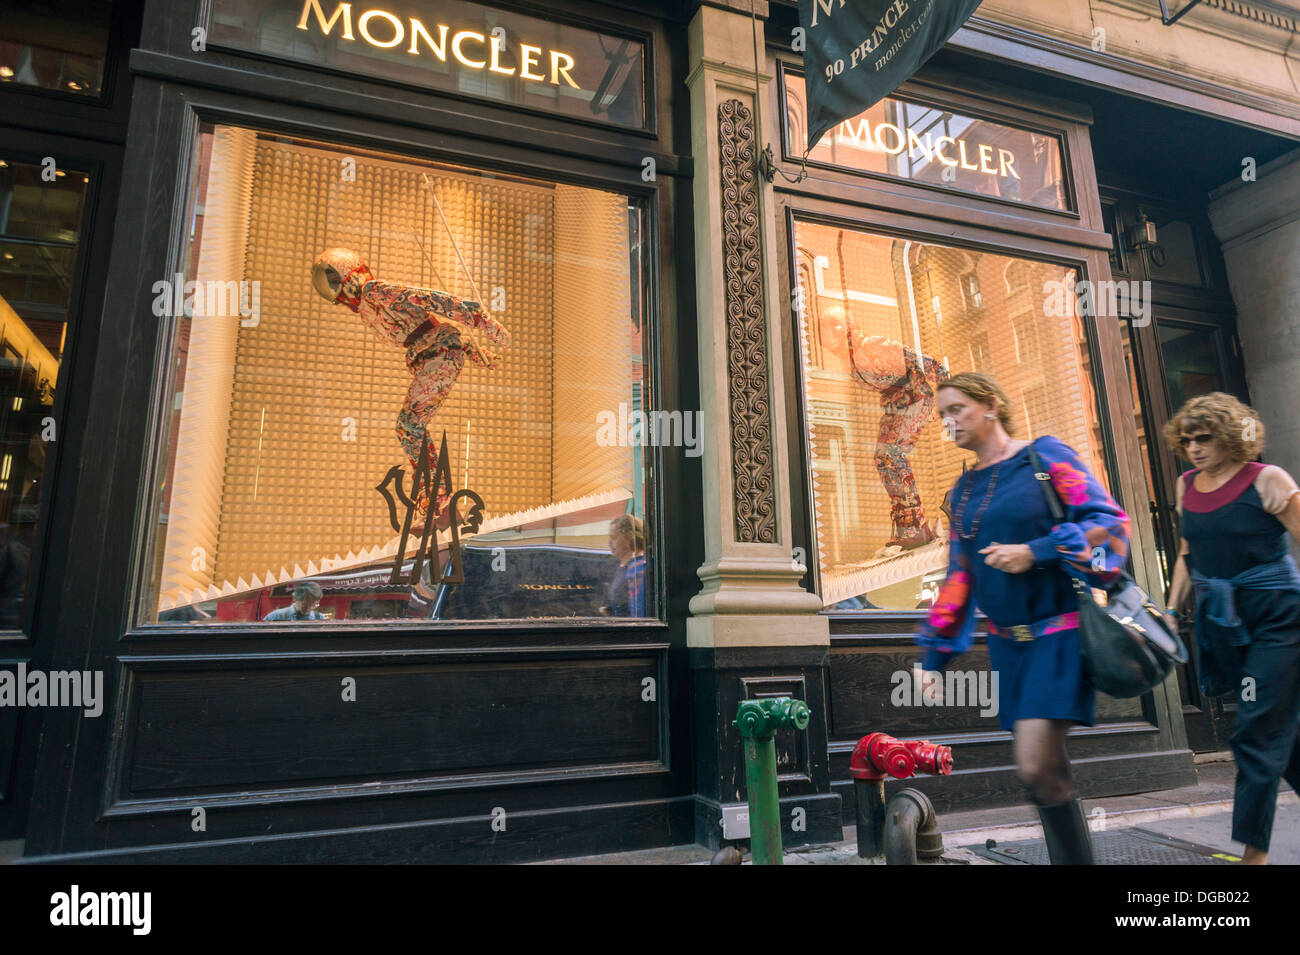 The Moncler apparel company store in the Soho neighborhood of New York  Stock Photo - Alamy